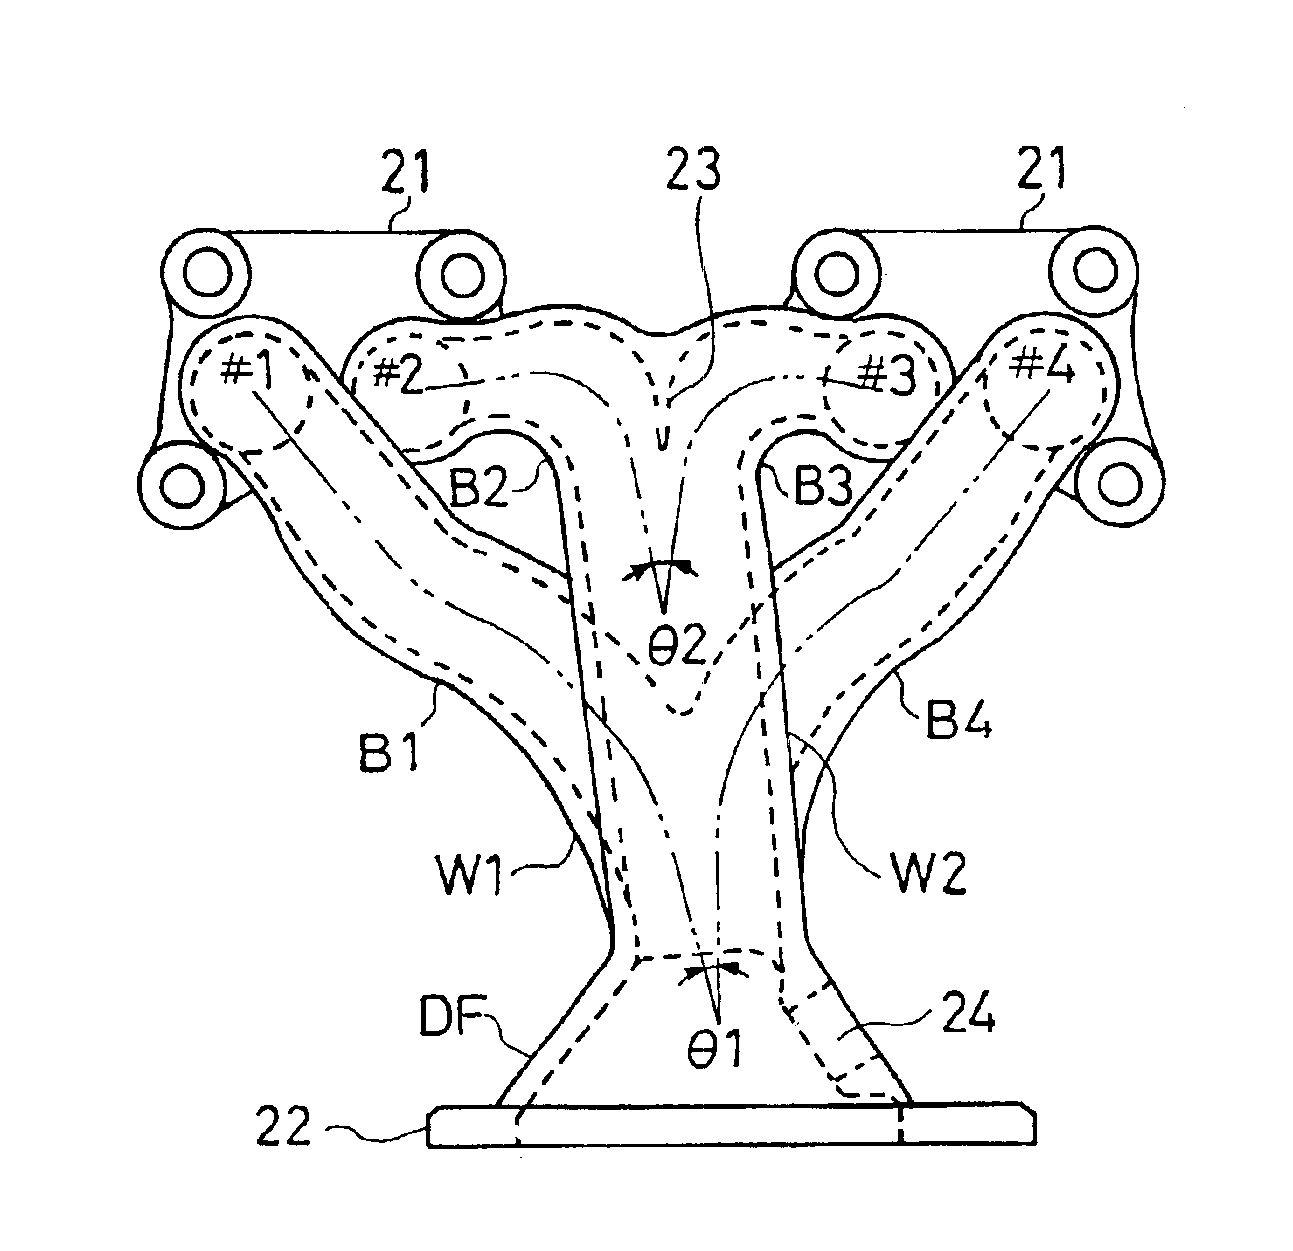 Exhaust manifold for four-cylinder engine